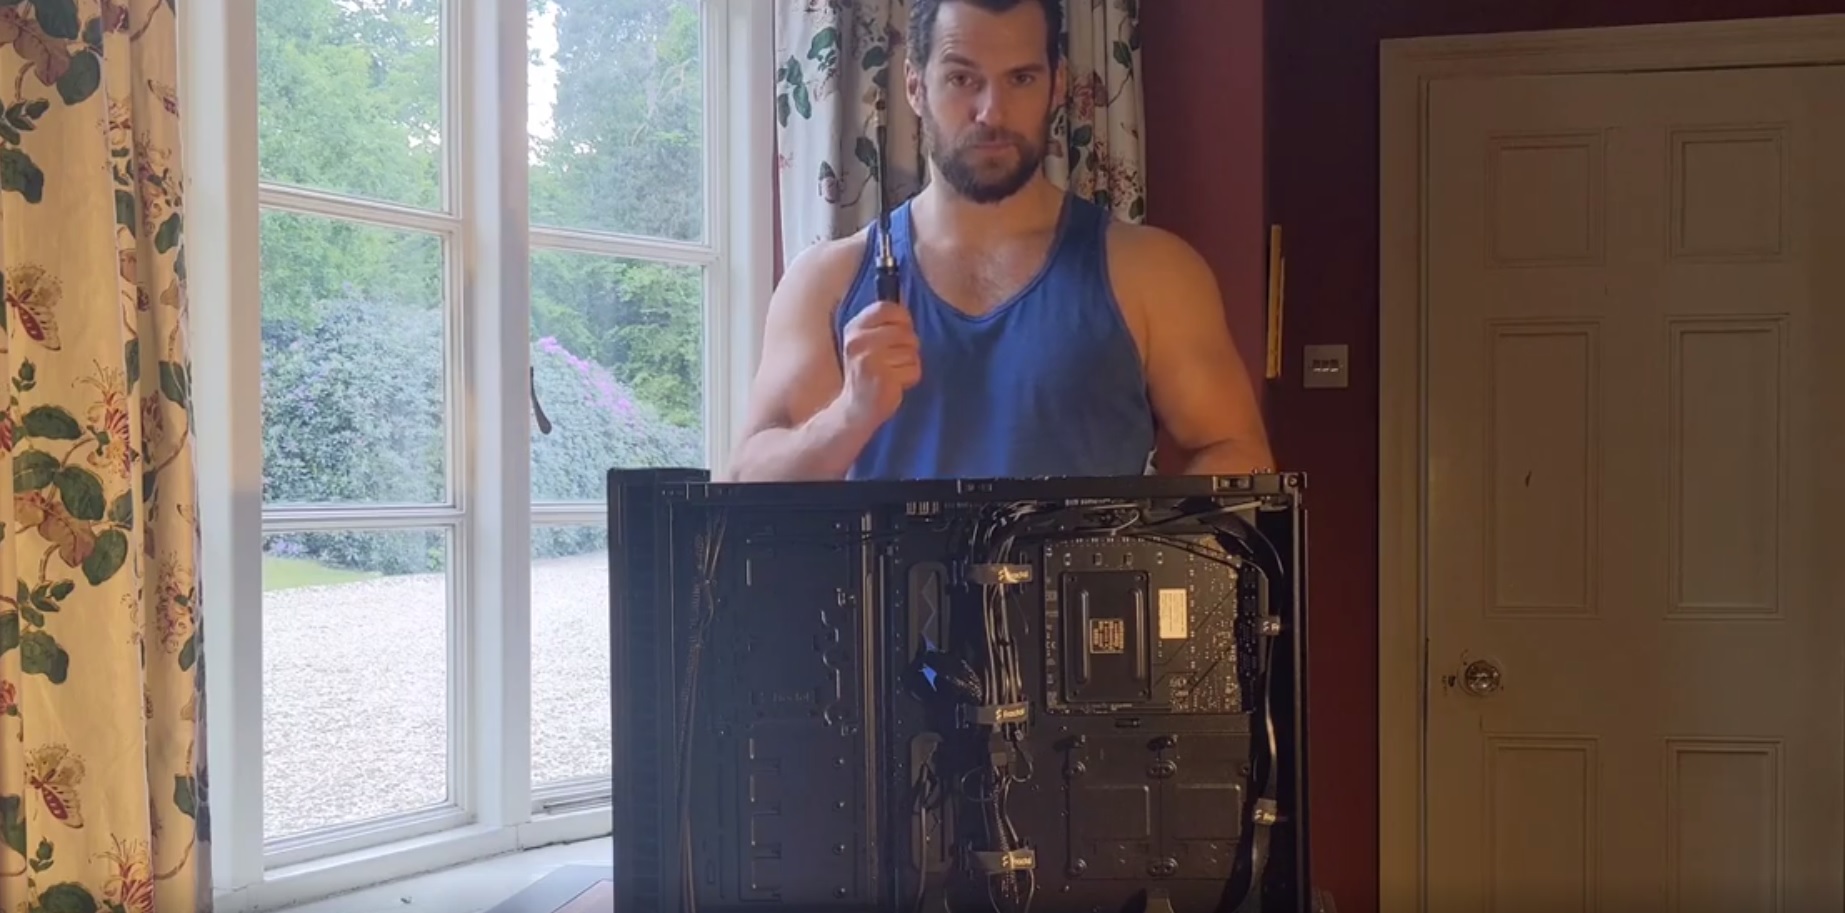  Henry Cavill has PC hardware issues just like you or me 